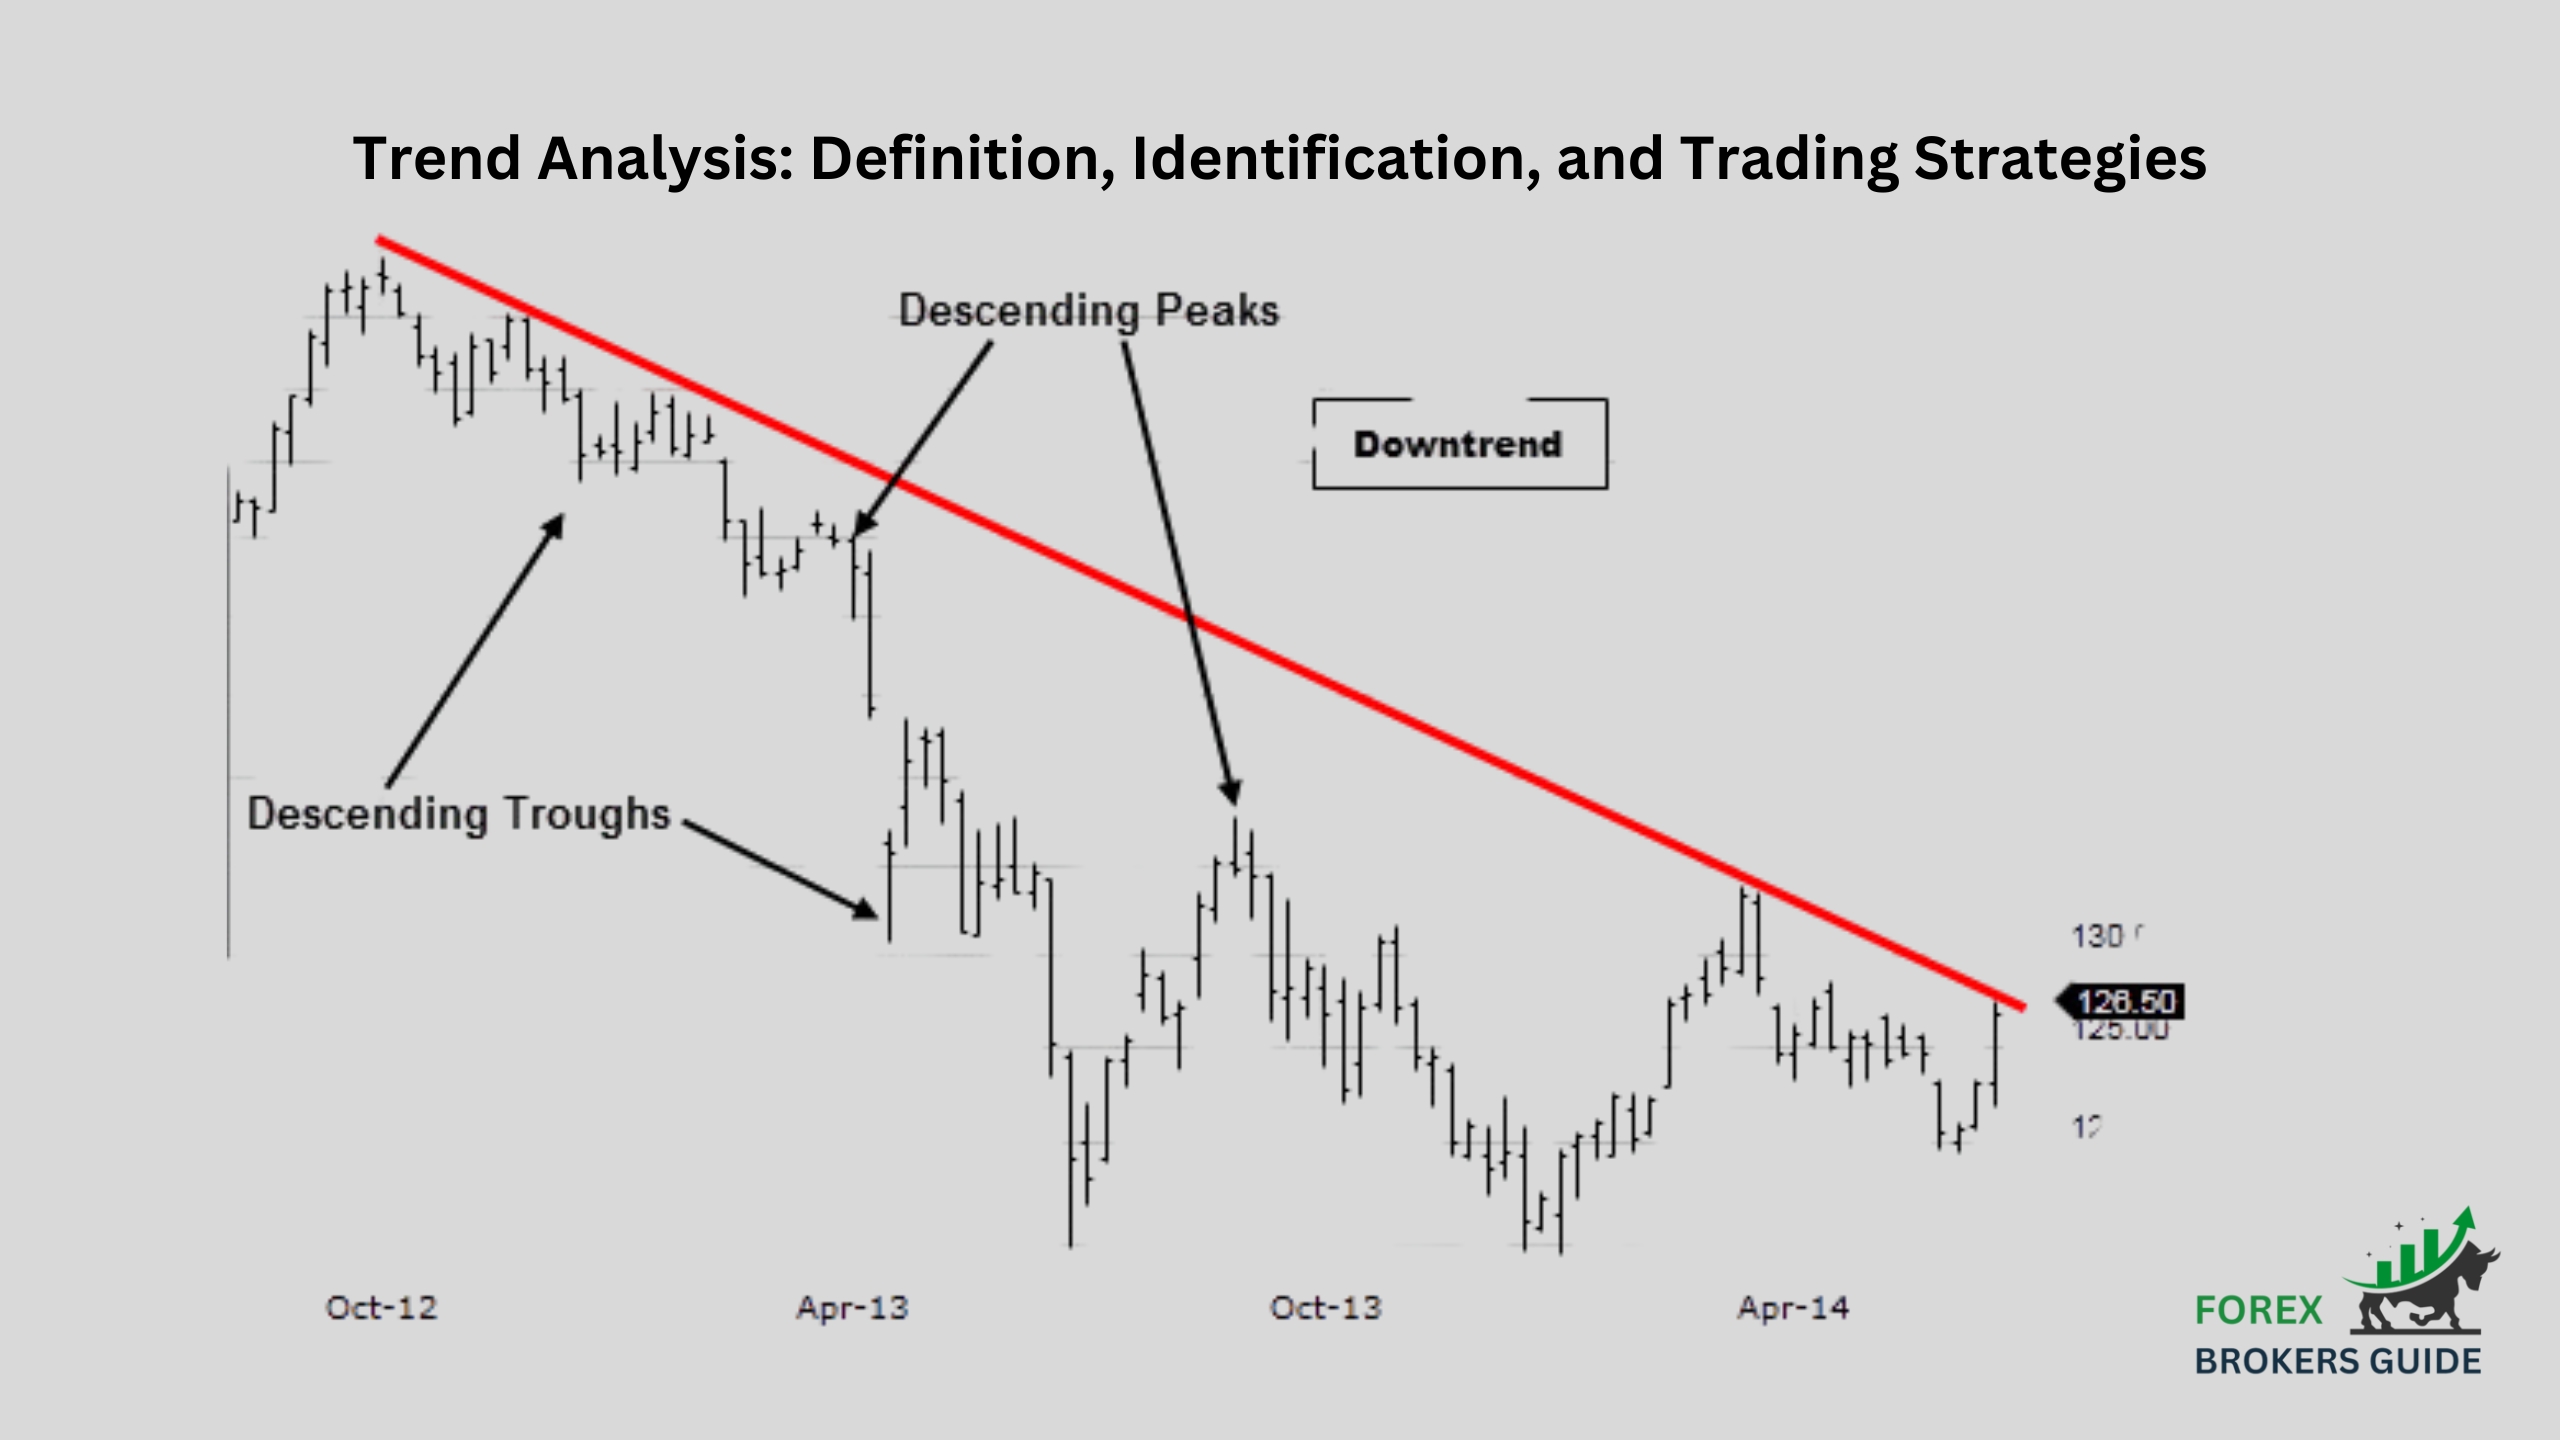 Trend Analysis: Definition, Identification, and Trading Strategies